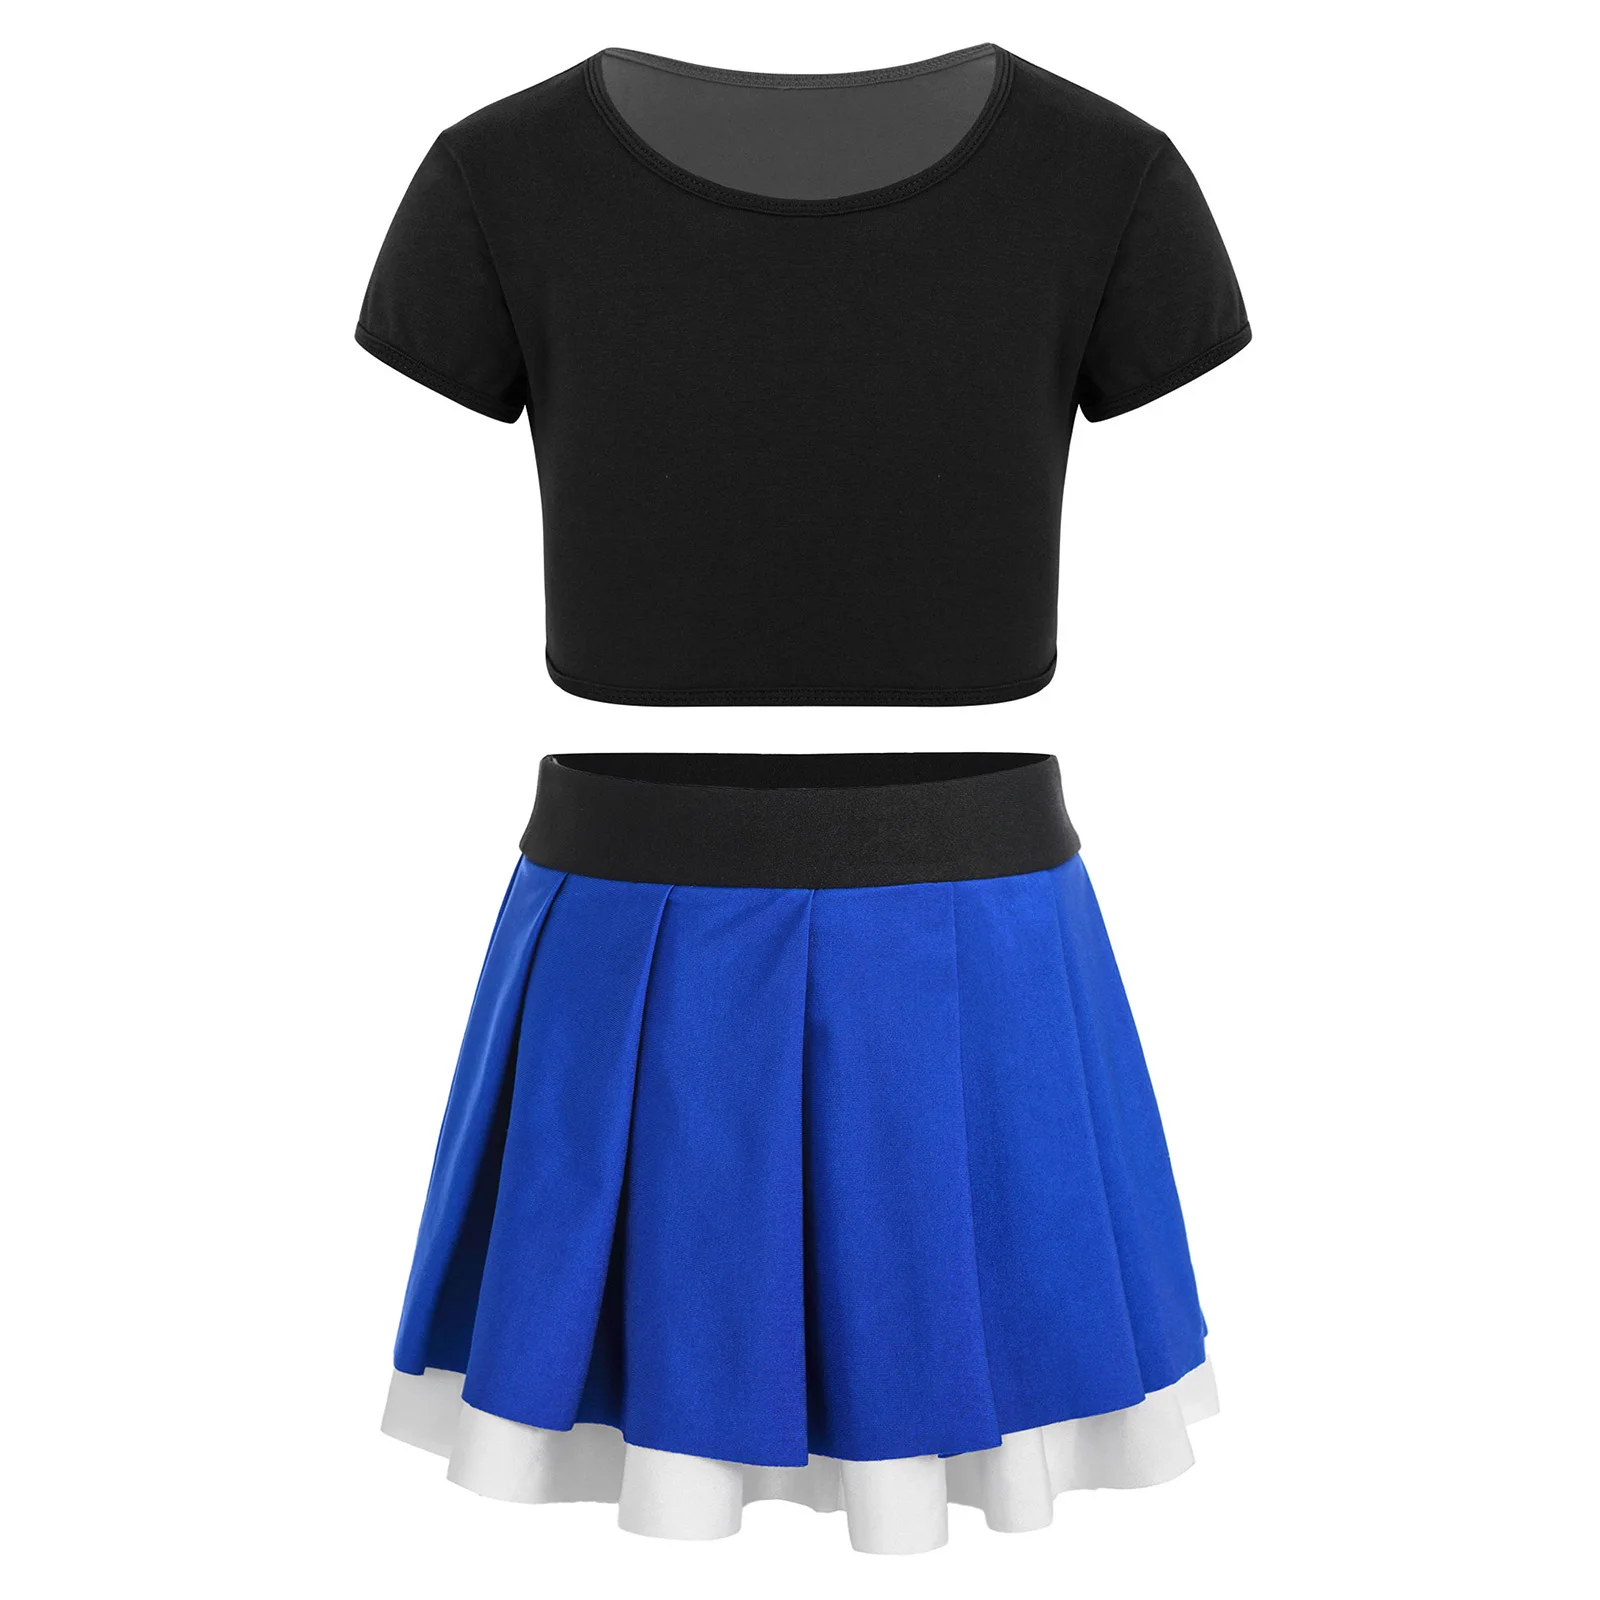 

Kids Girls Dance Performance Set Short Sleeves T Shirt Crop Top with Pleated Skirt Two Layers Contrast Color for Dance Wear